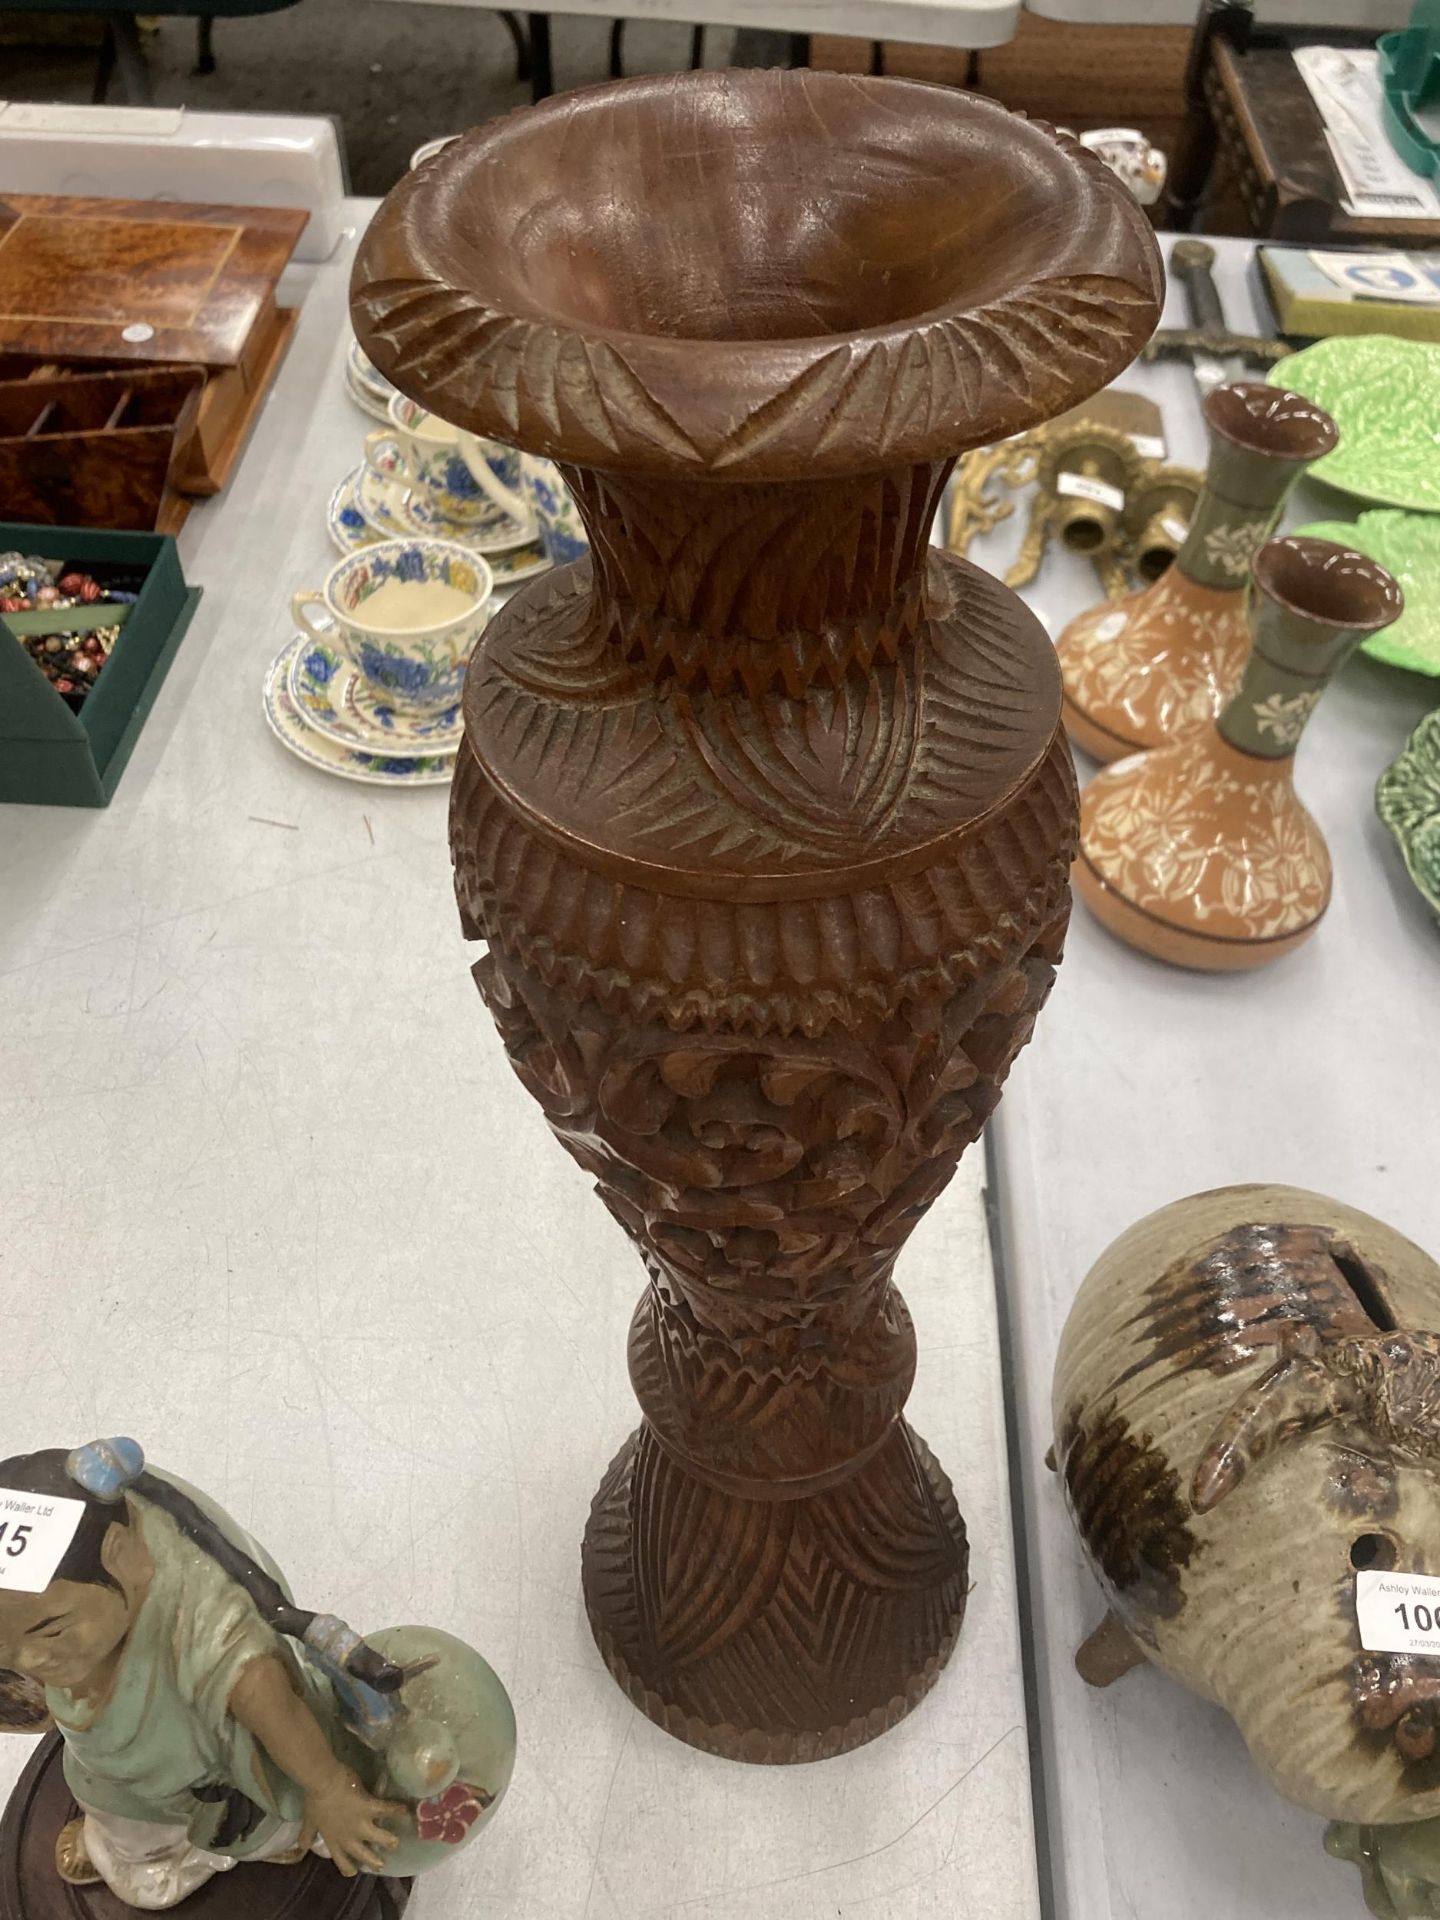 A LARGE HEAVILY CARVED WOODEN VASE, HEIGHT 50CM - Image 2 of 2